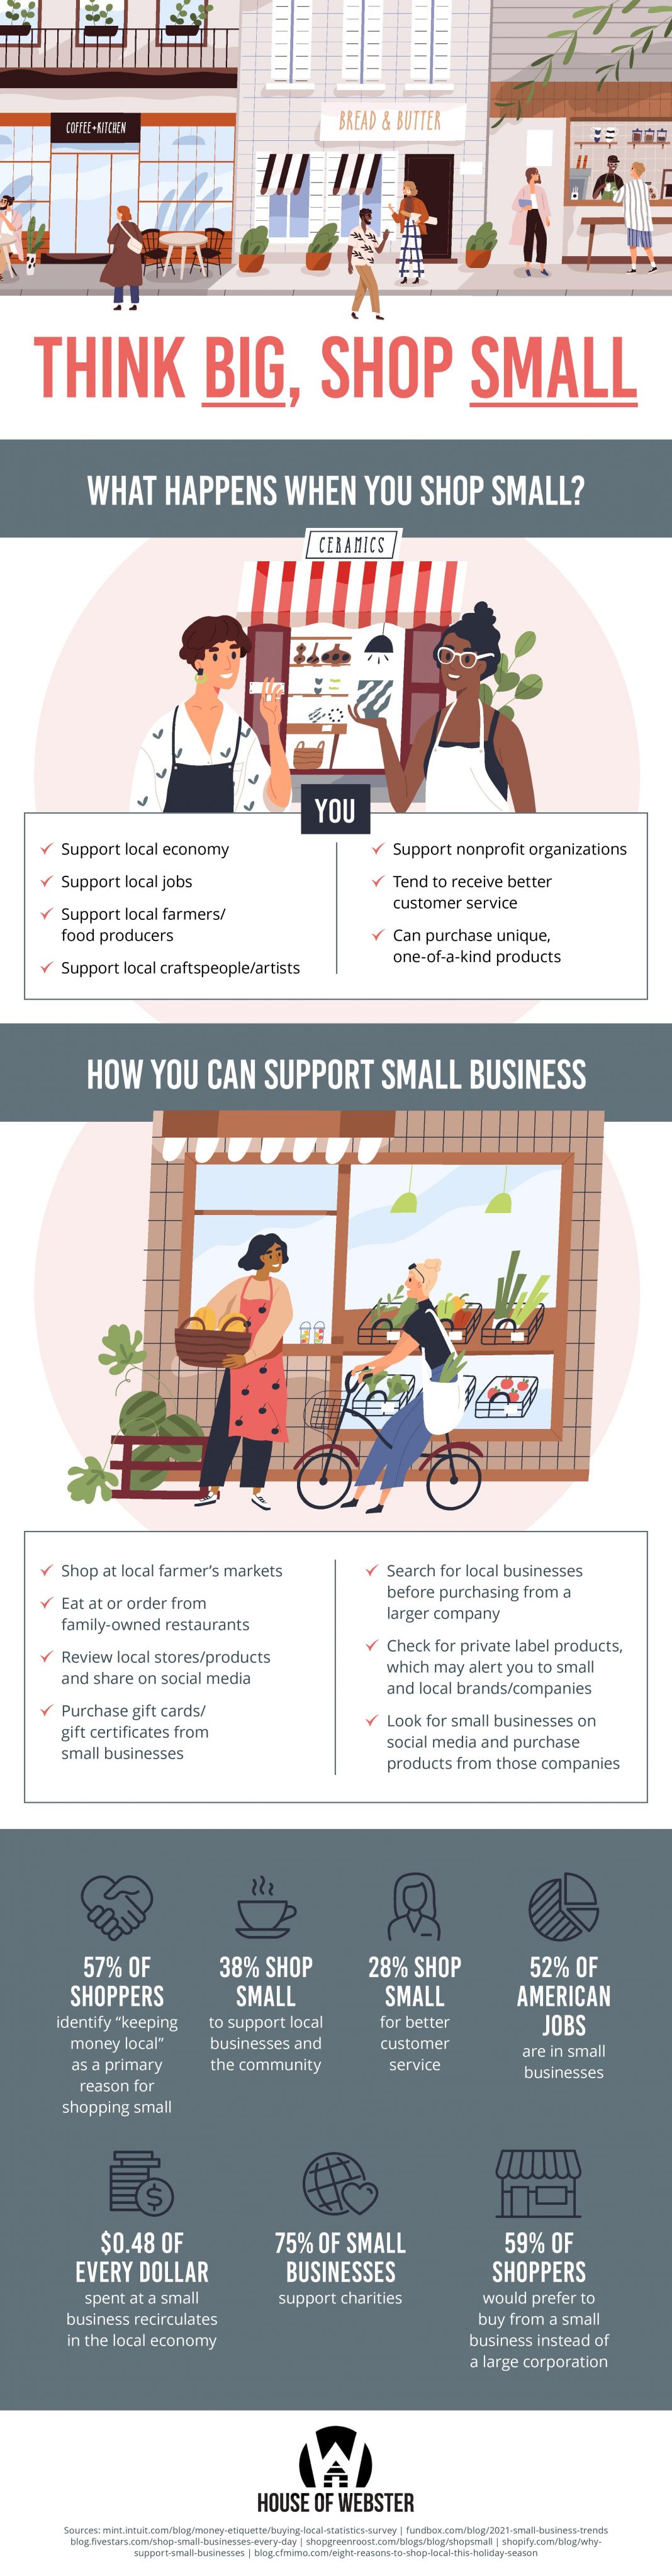 think big shop small infographic